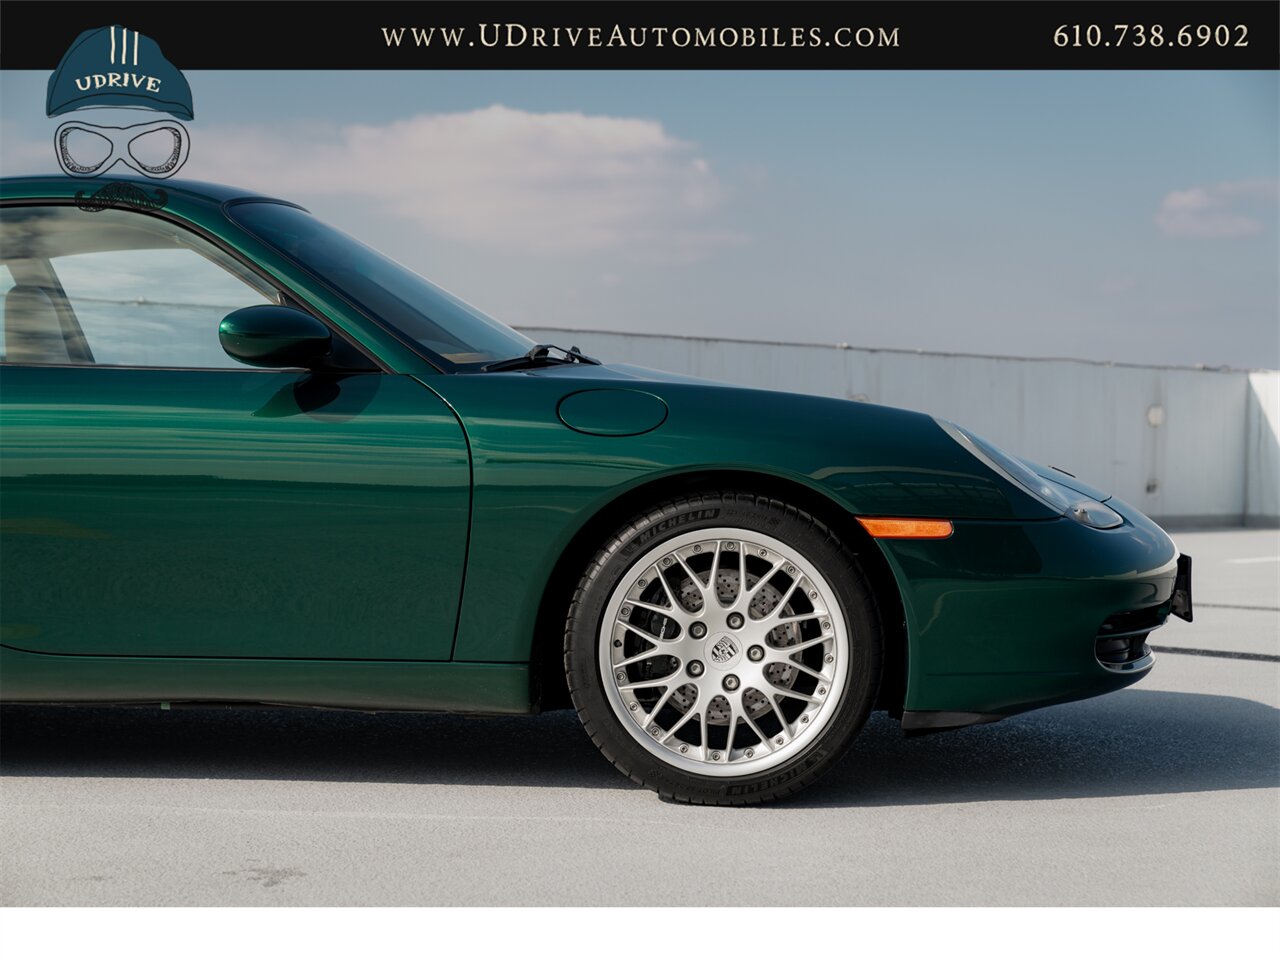 2001 Porsche 911 Carrera 996 Coupe 6 Speed Rare Rain Forest Green  IMS Retrofit Detailed Service History - Photo 15 - West Chester, PA 19382